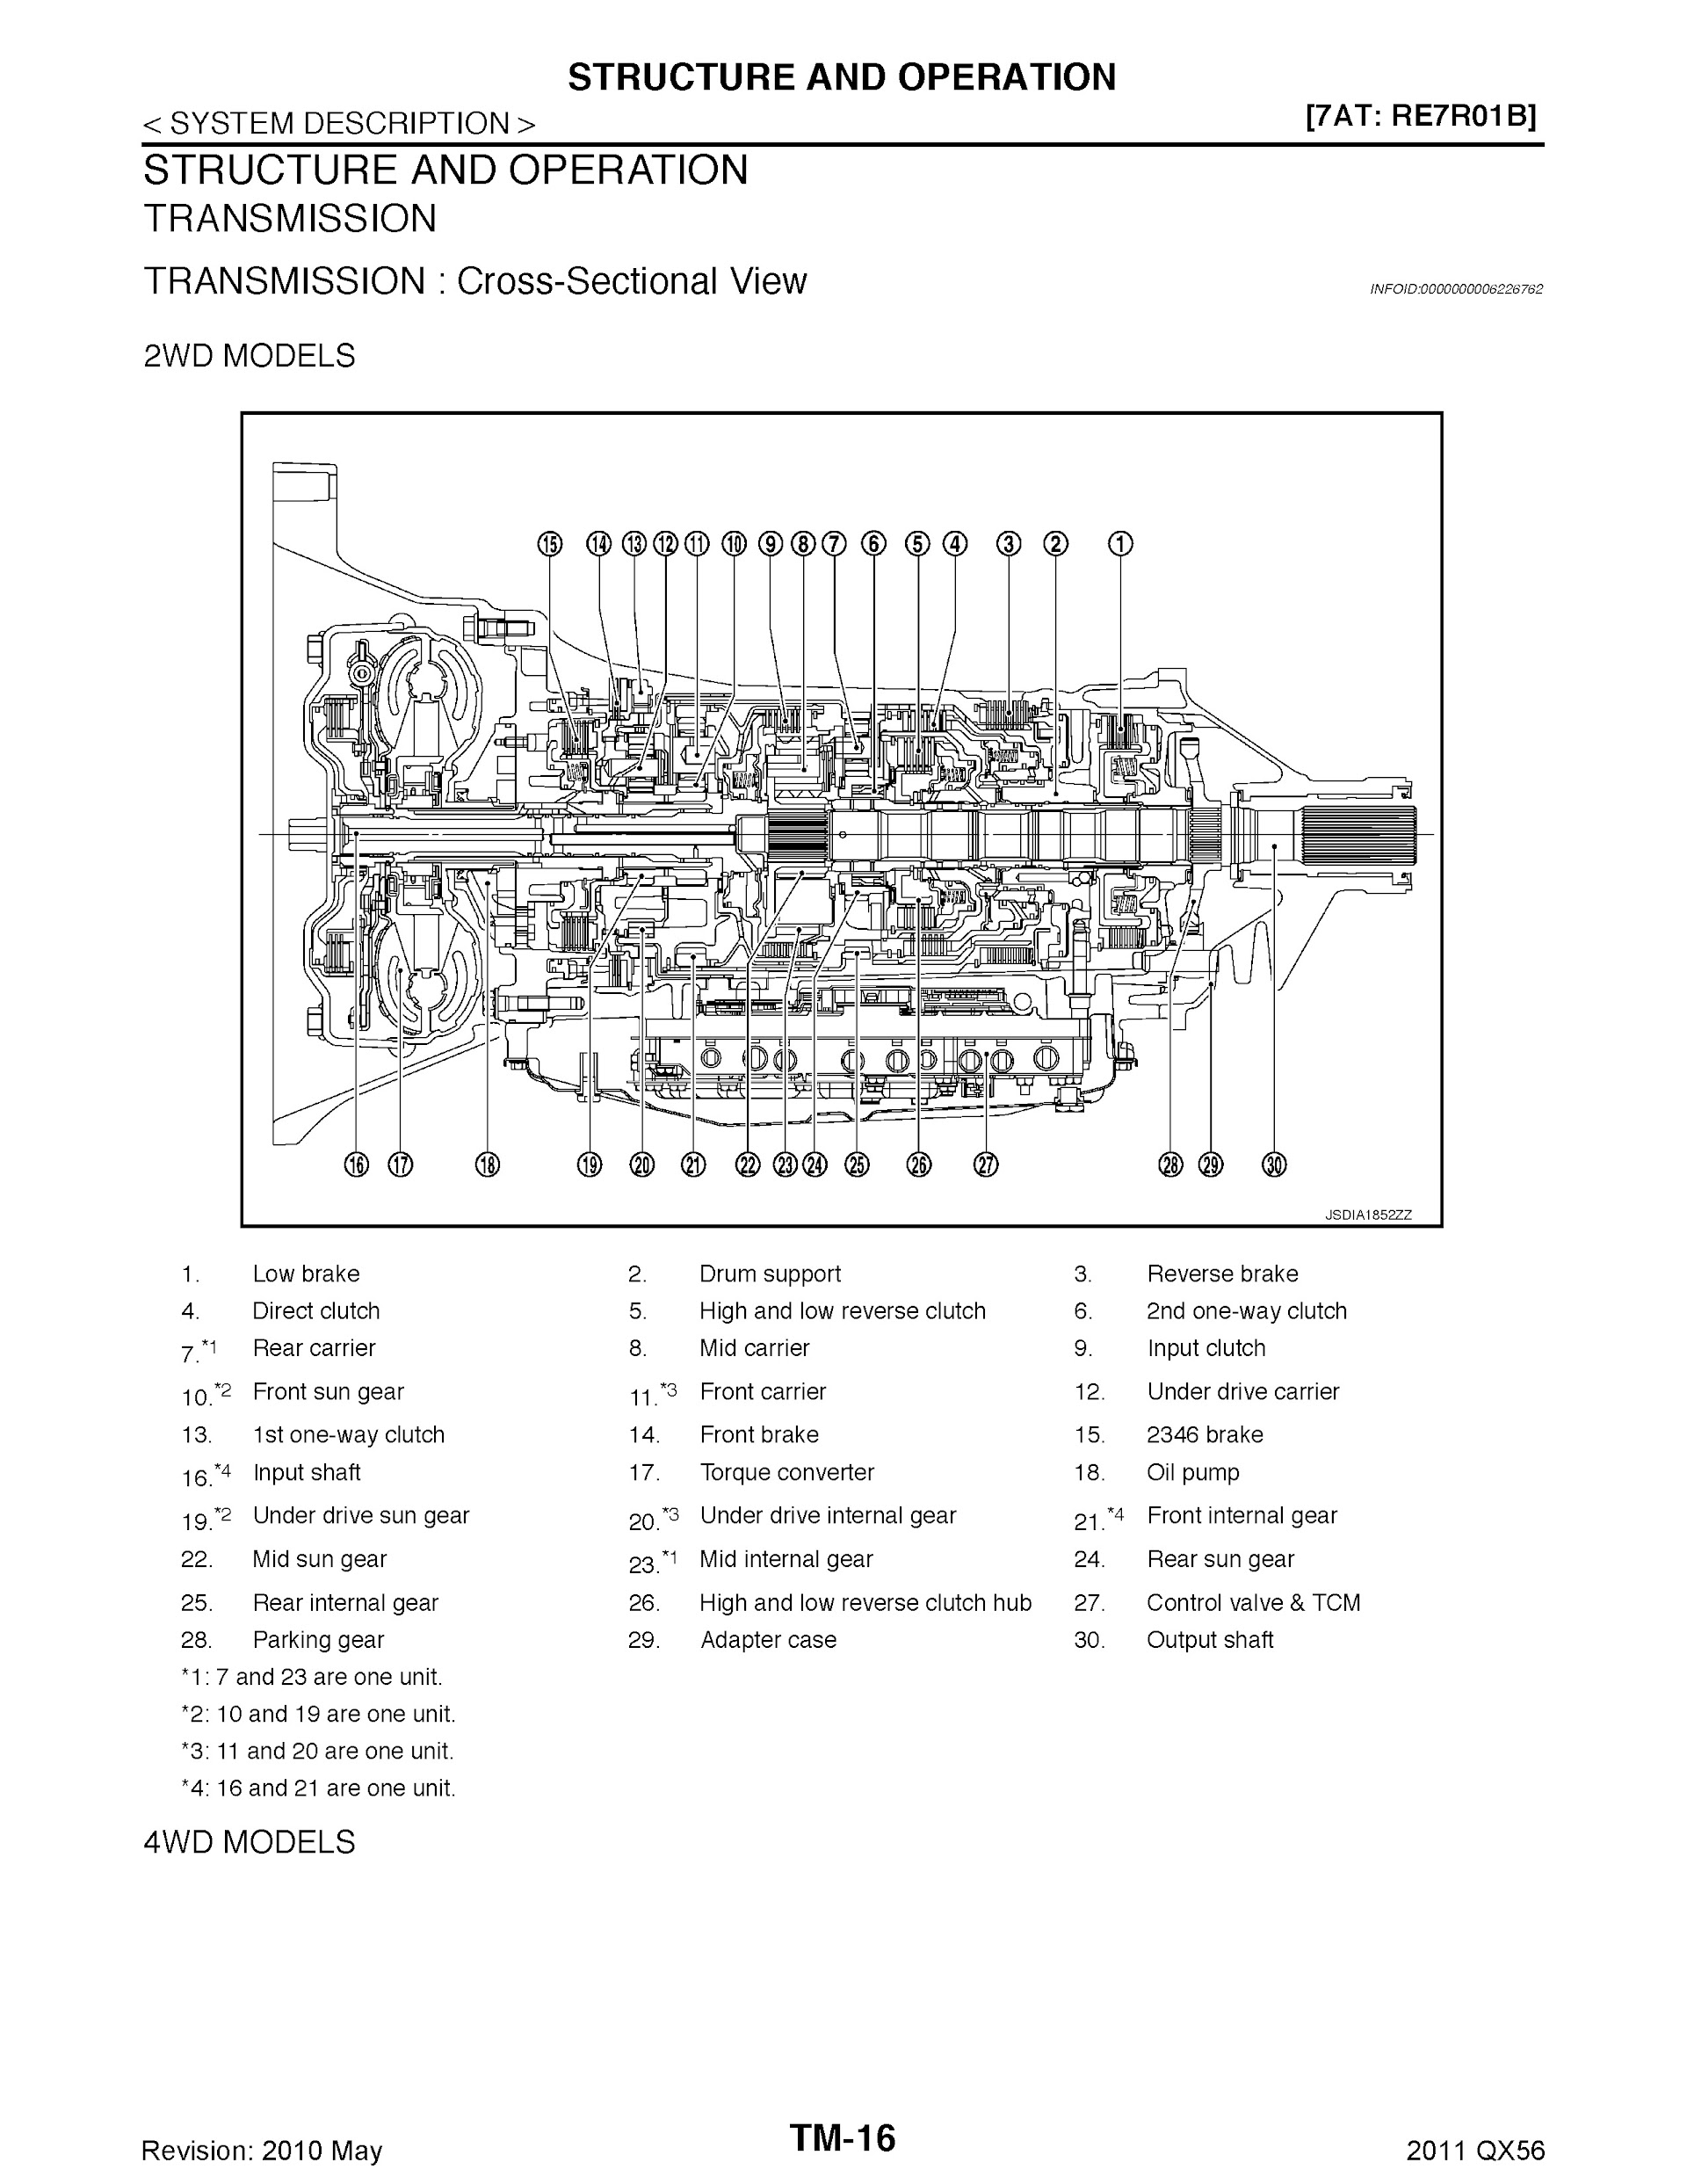 2011 Infiniti QX56 Repair Manual, Transmission Structure and Operation